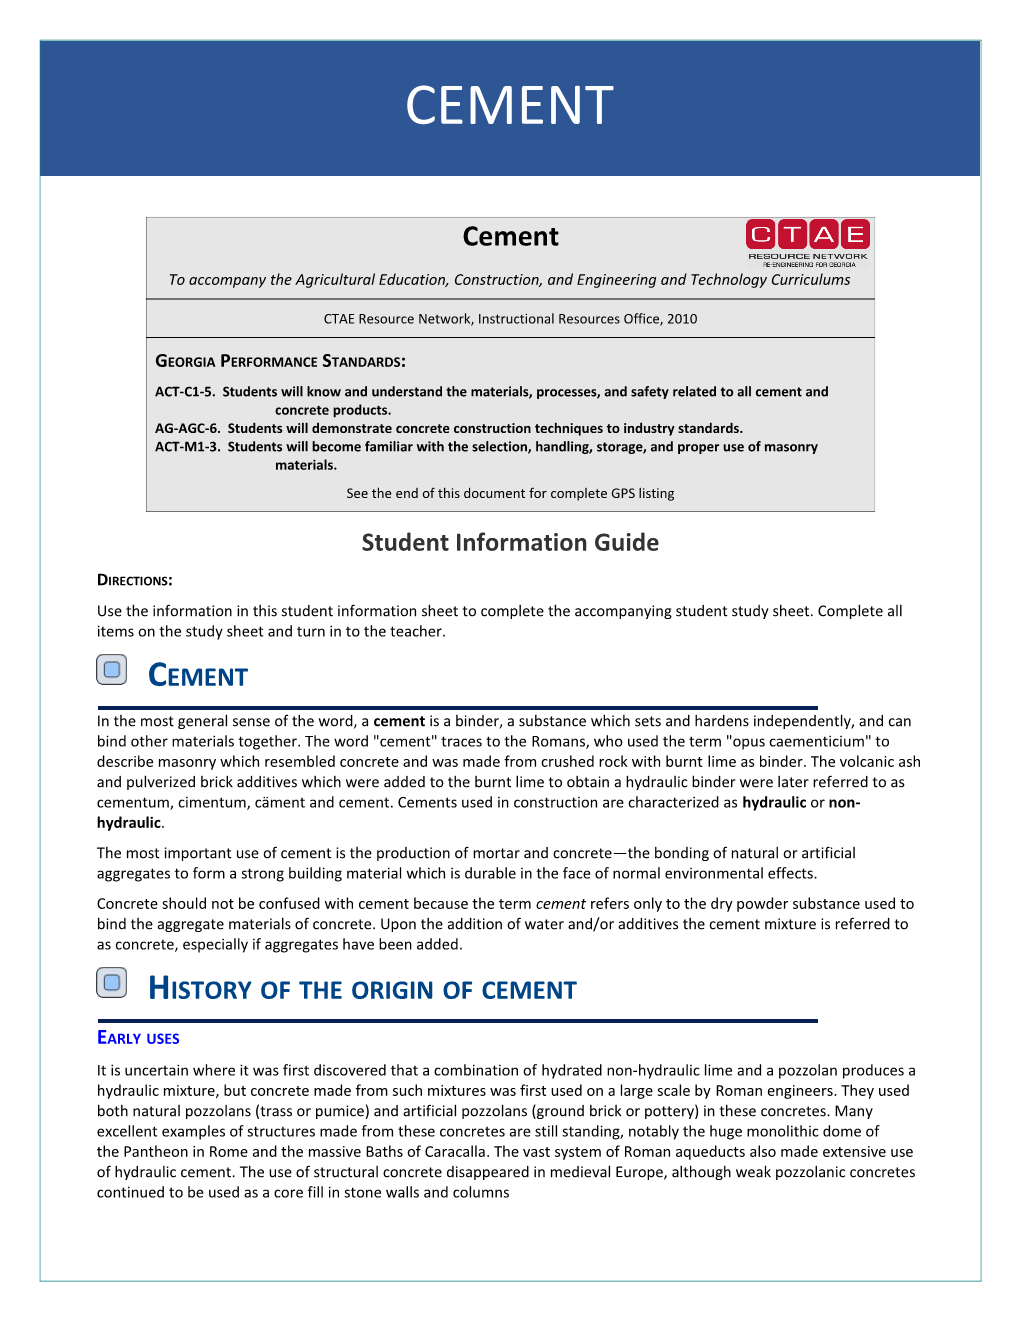 Student Information Guide